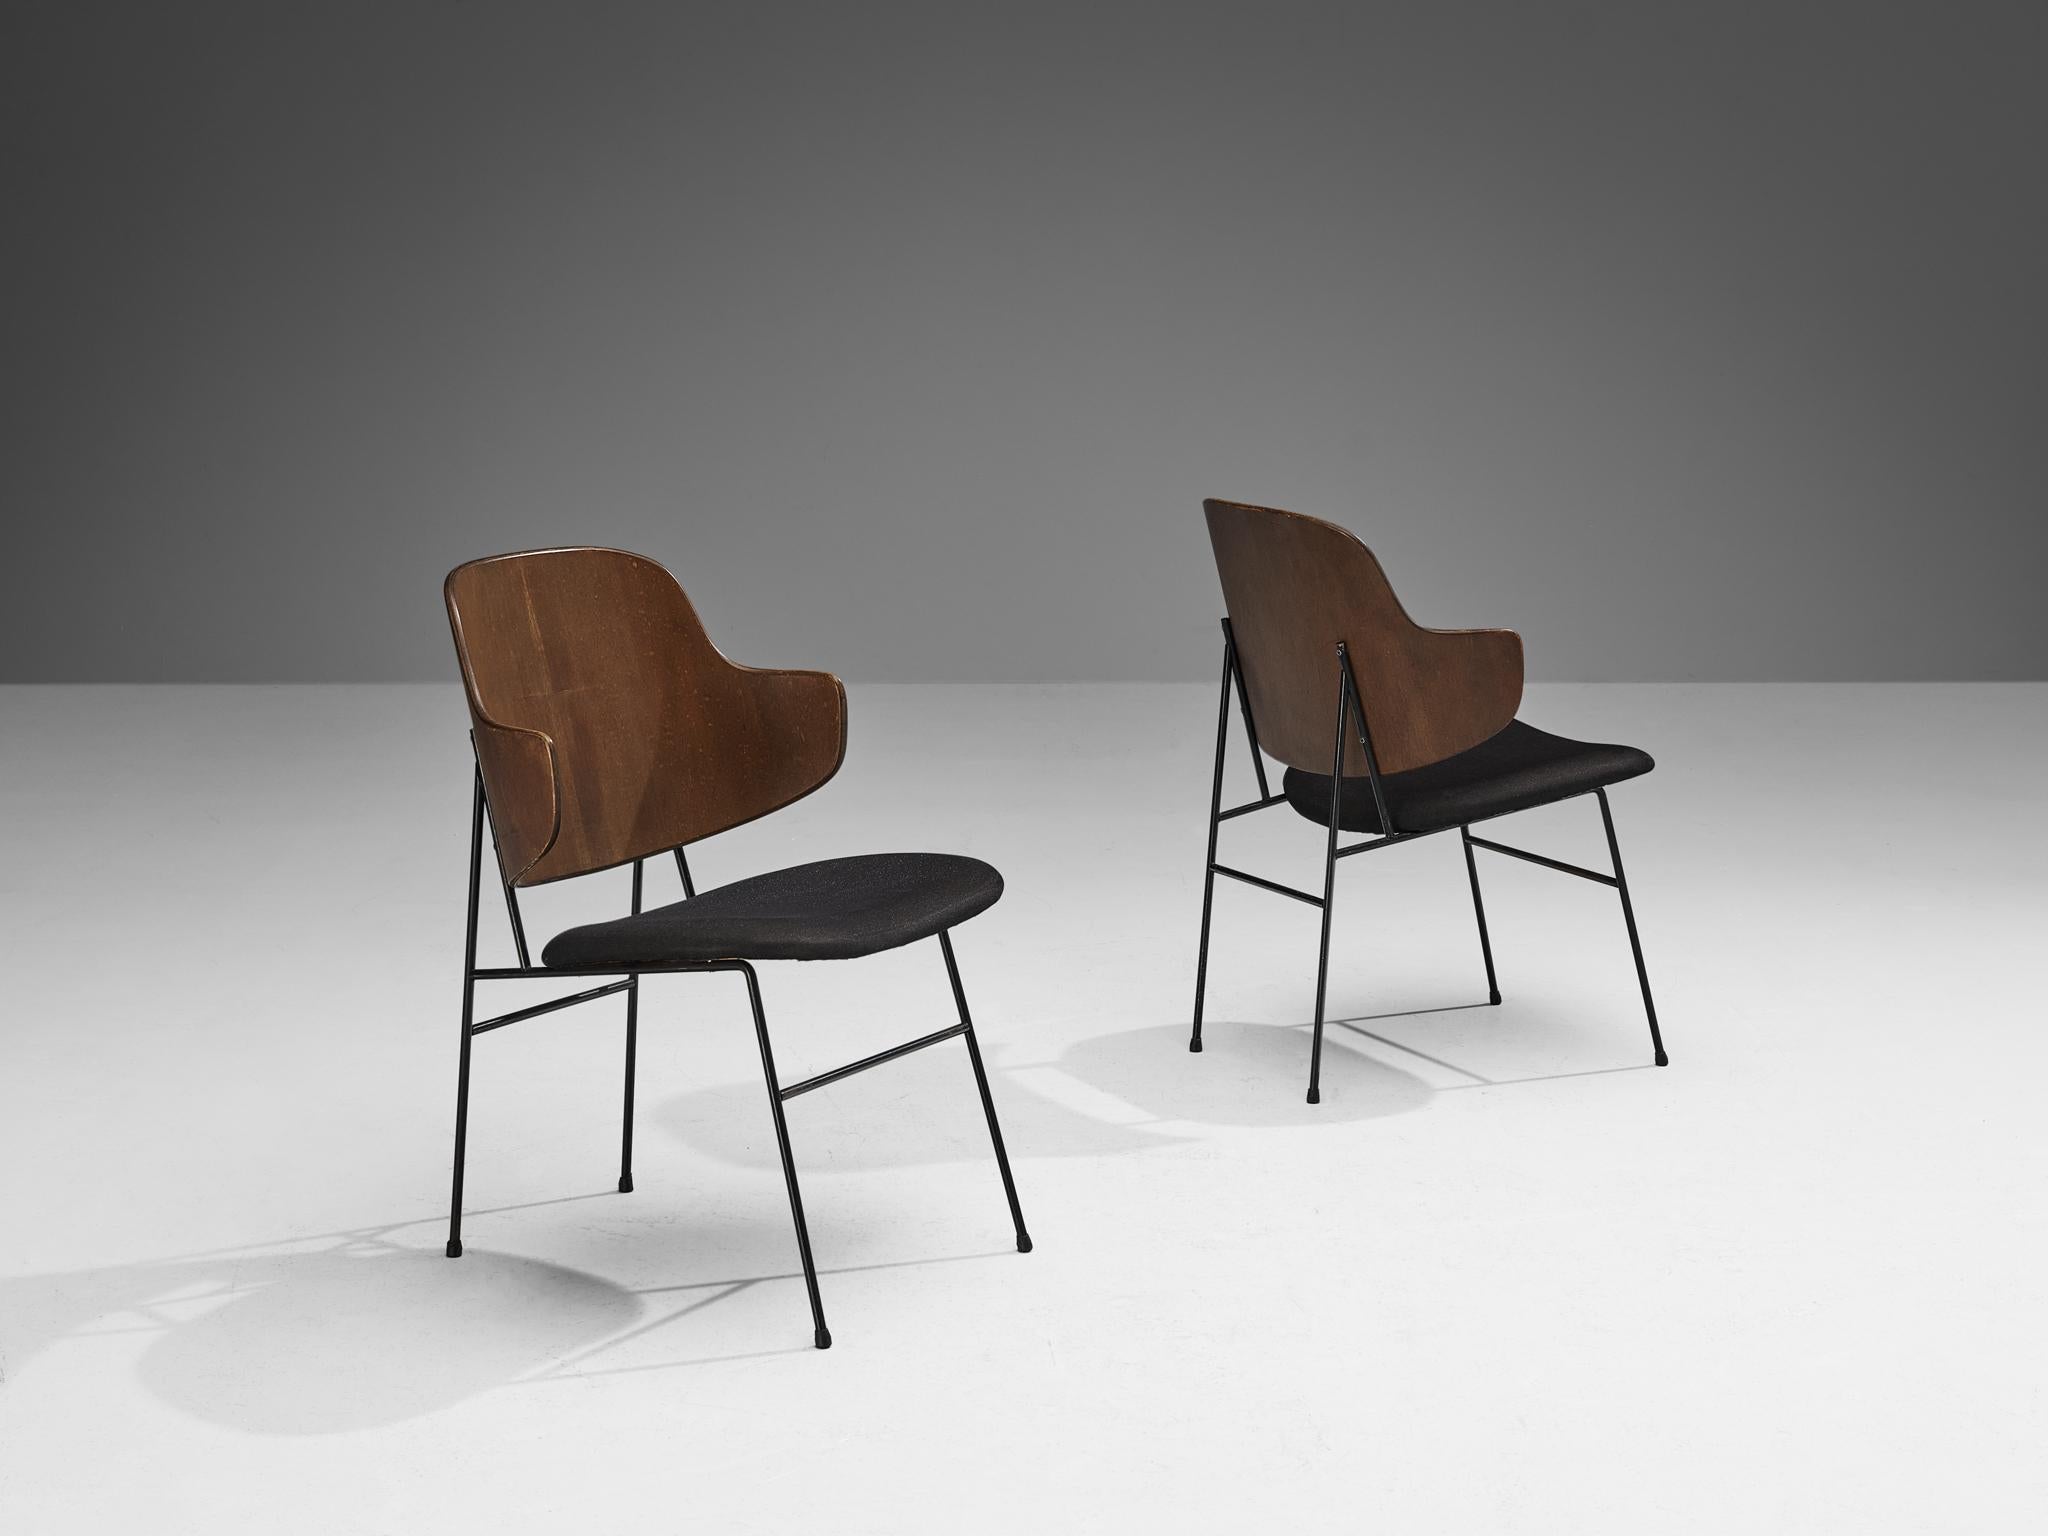 Ib Kofod-Larsen for Christensen & Larsen, 'Pinguin' dining chairs, mahogany plywood, fabric, coated iron, Denmark, design 1953, production, 1960s.

The 'Pinguin' chair by Ib Kofod-Larsen was first taken into production by Selig in 1953. The chairs